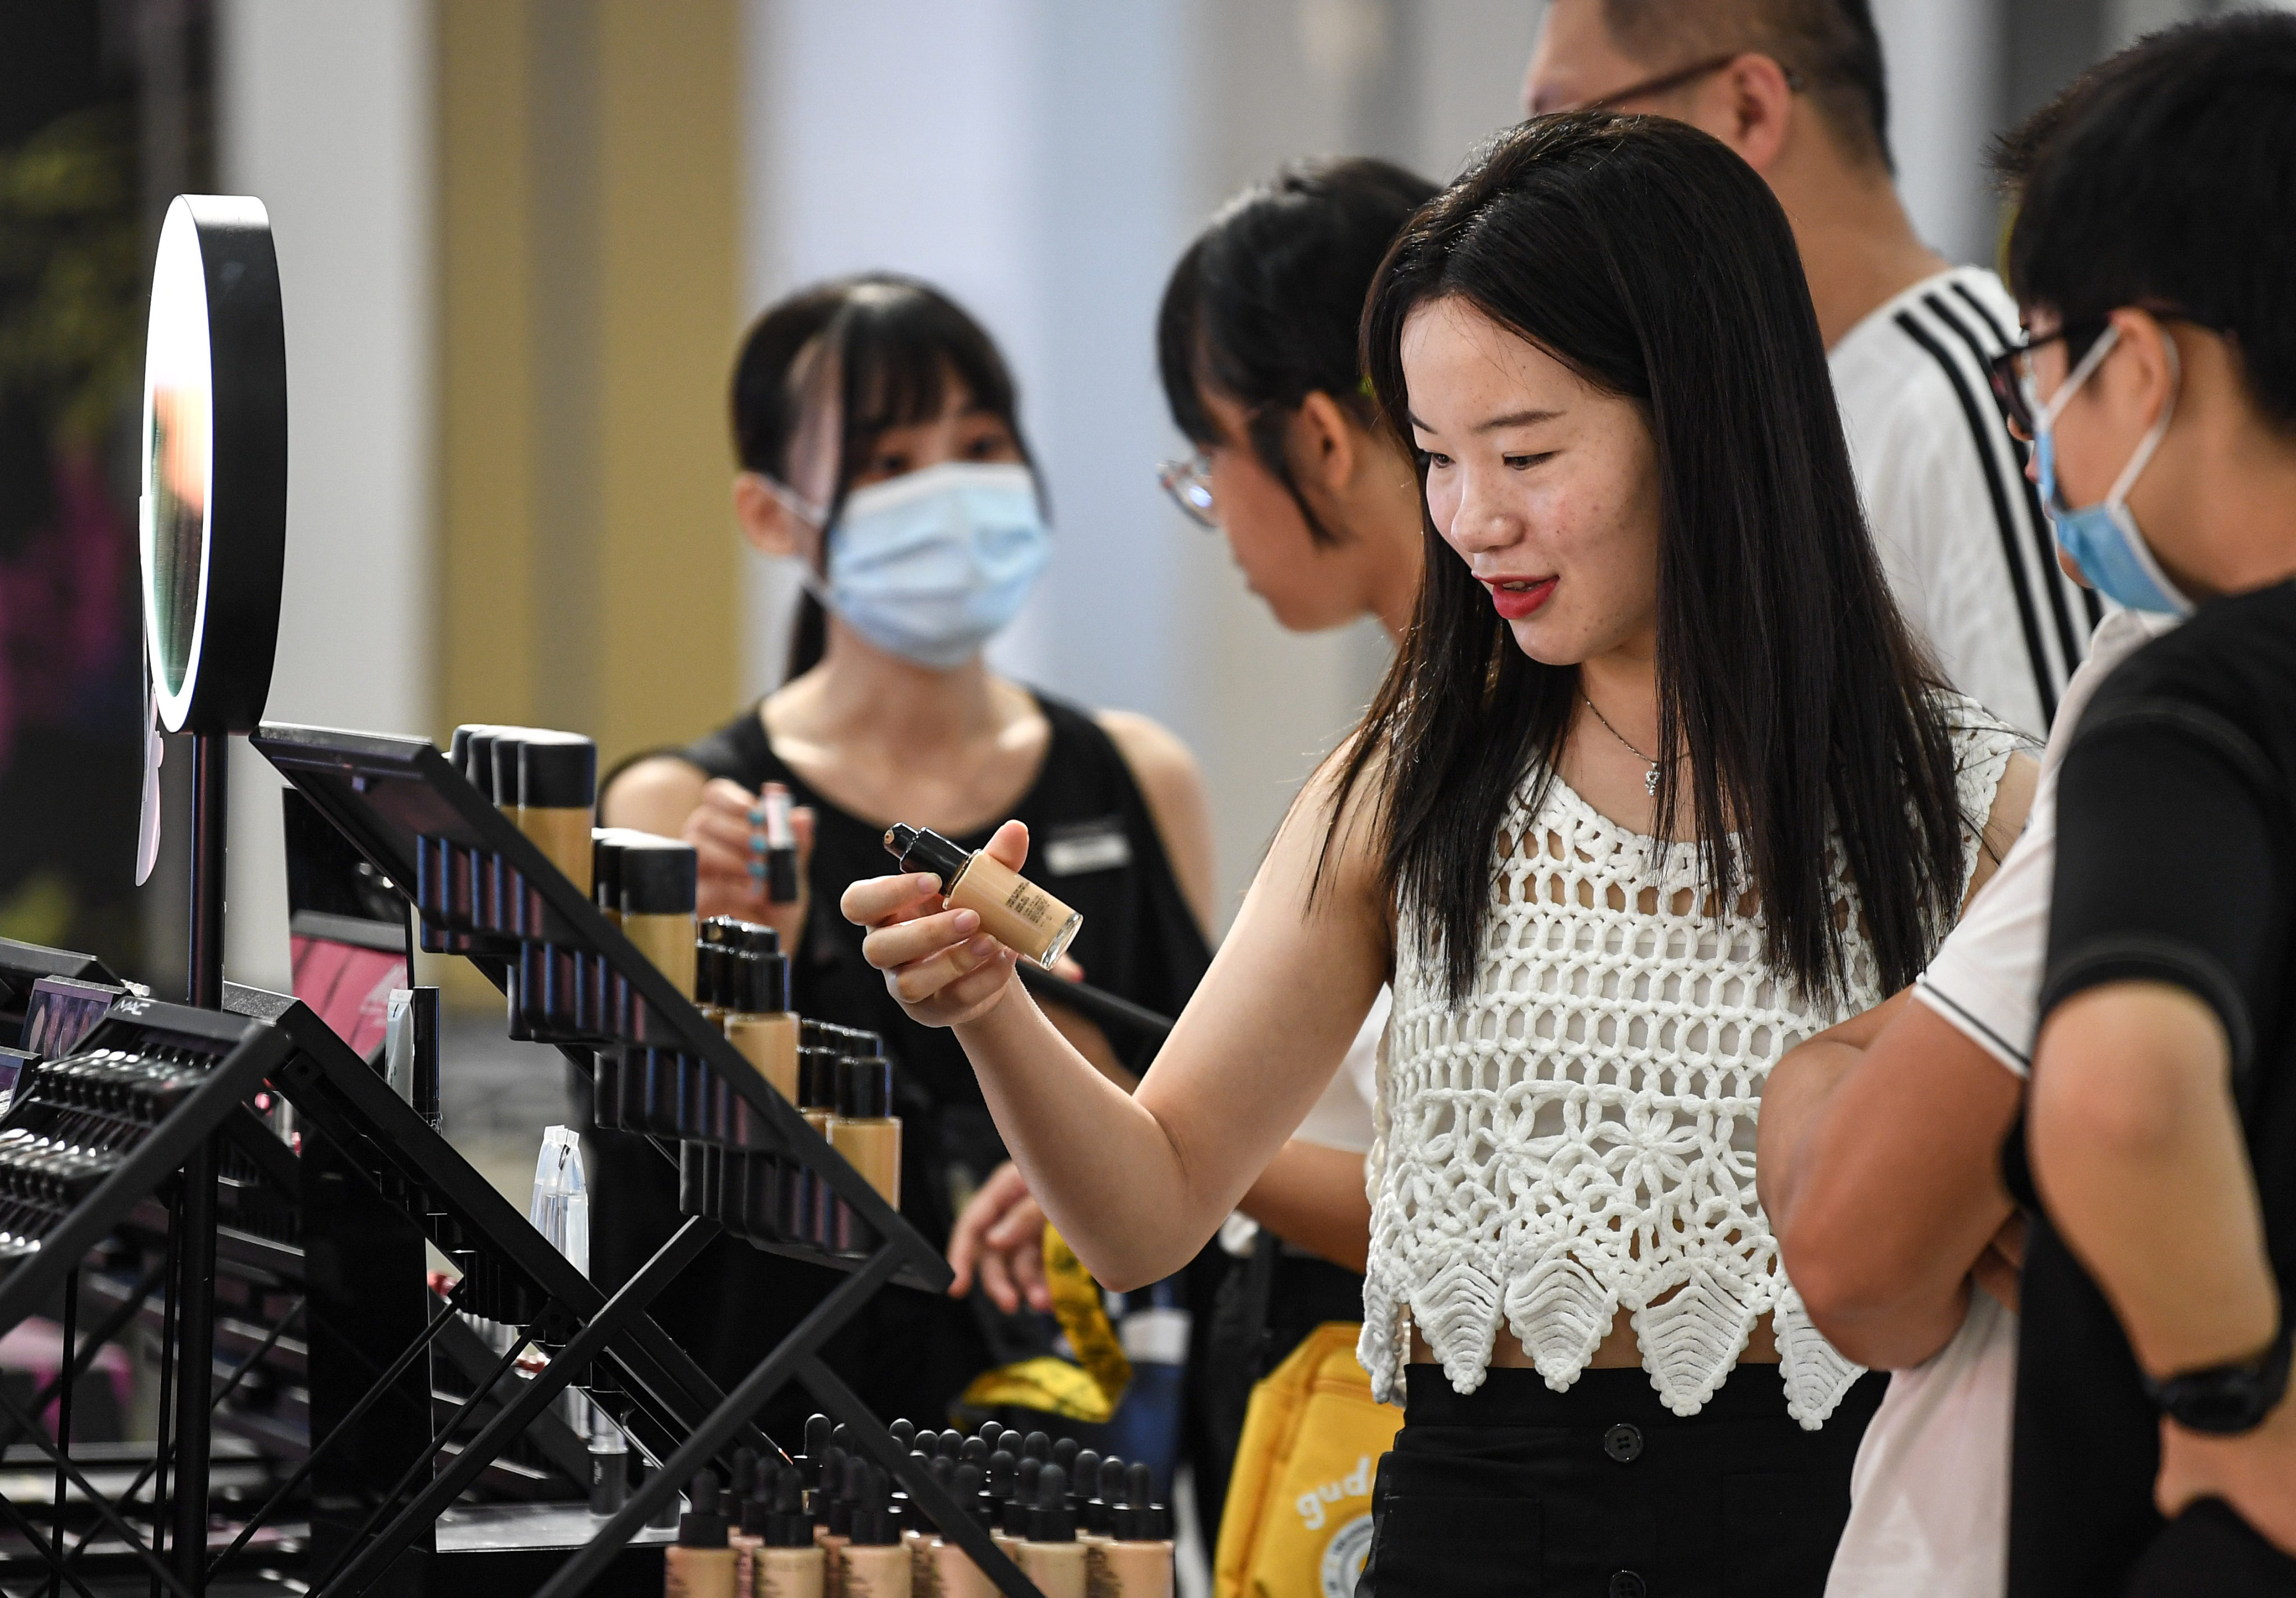 Customers select products in a duty-free shopping mall in Haikou, in south China’s Hainan Province, on October 4, 2020. Photo: Xinhua